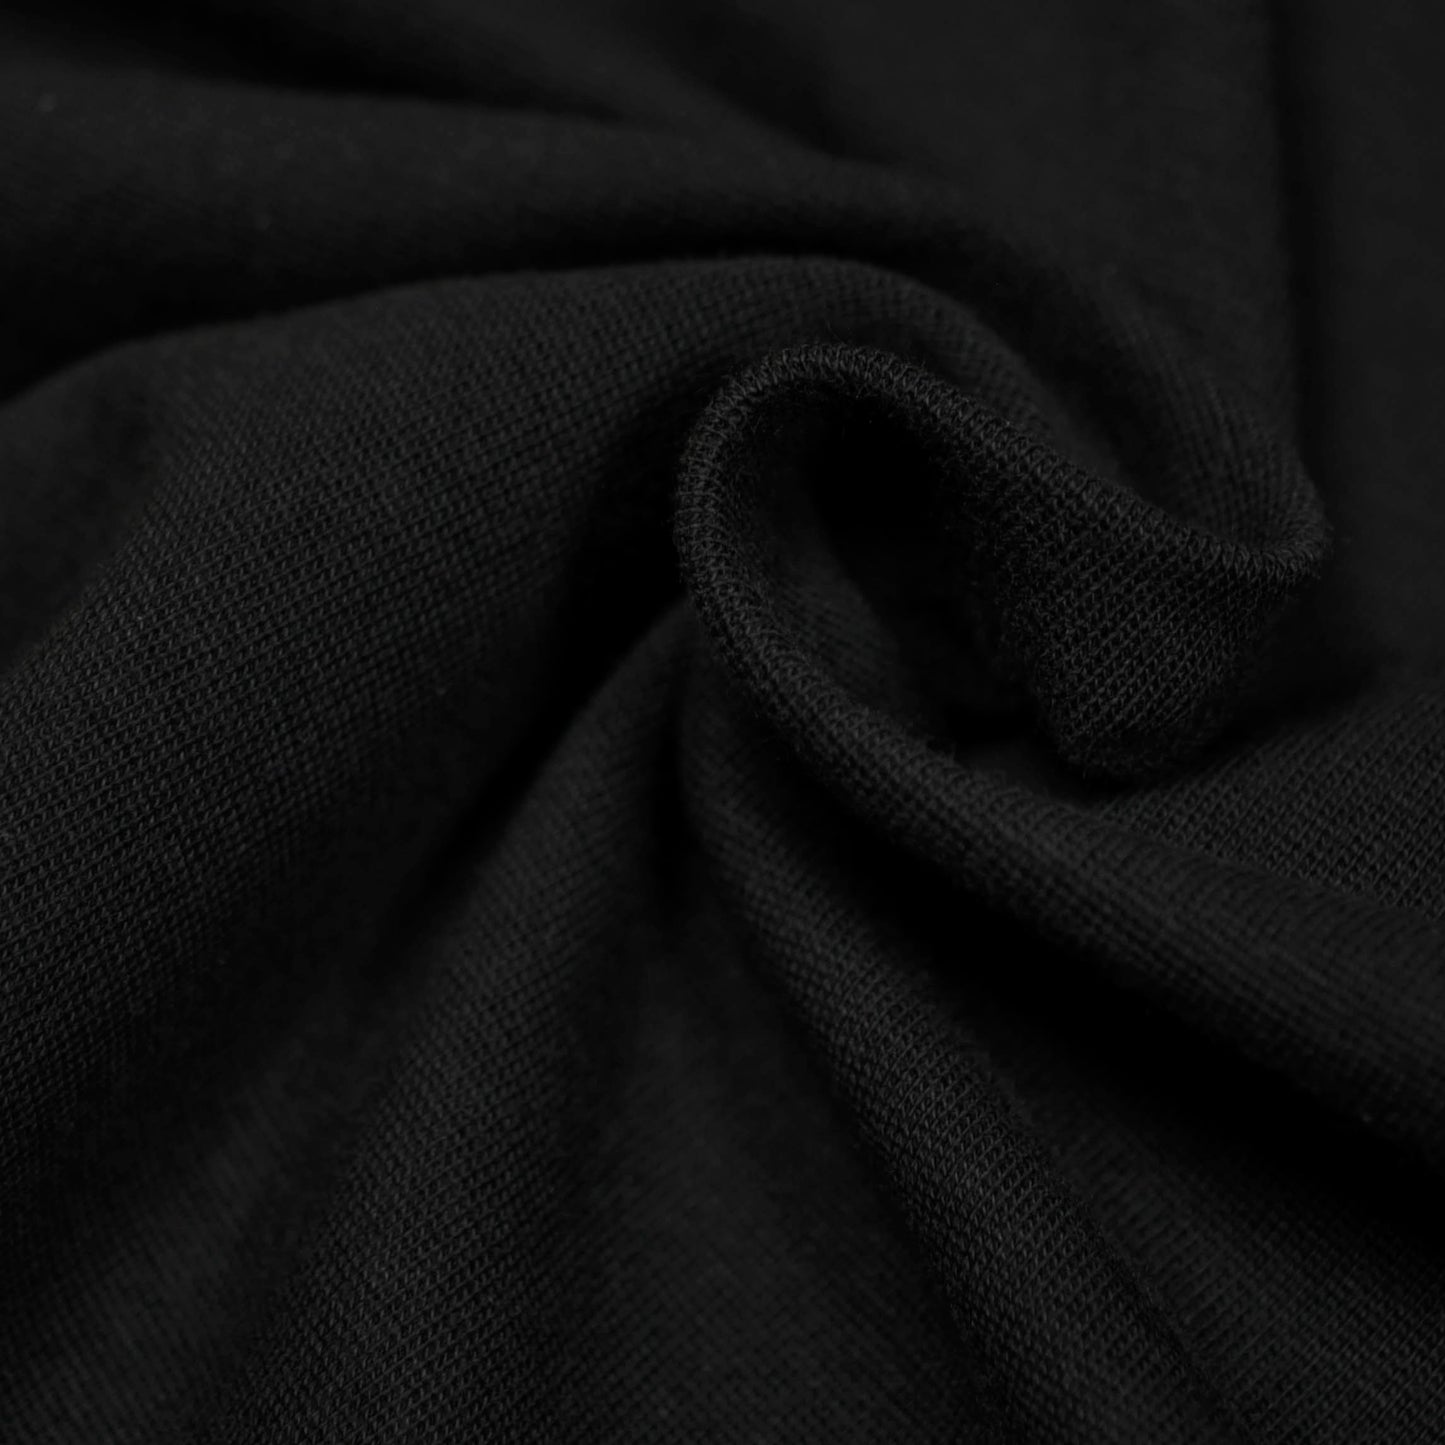 350gsm double knit ribbing 75%Cotton 25%Polyester double rib knit fabric  Manufacturer - Runtang Fabric